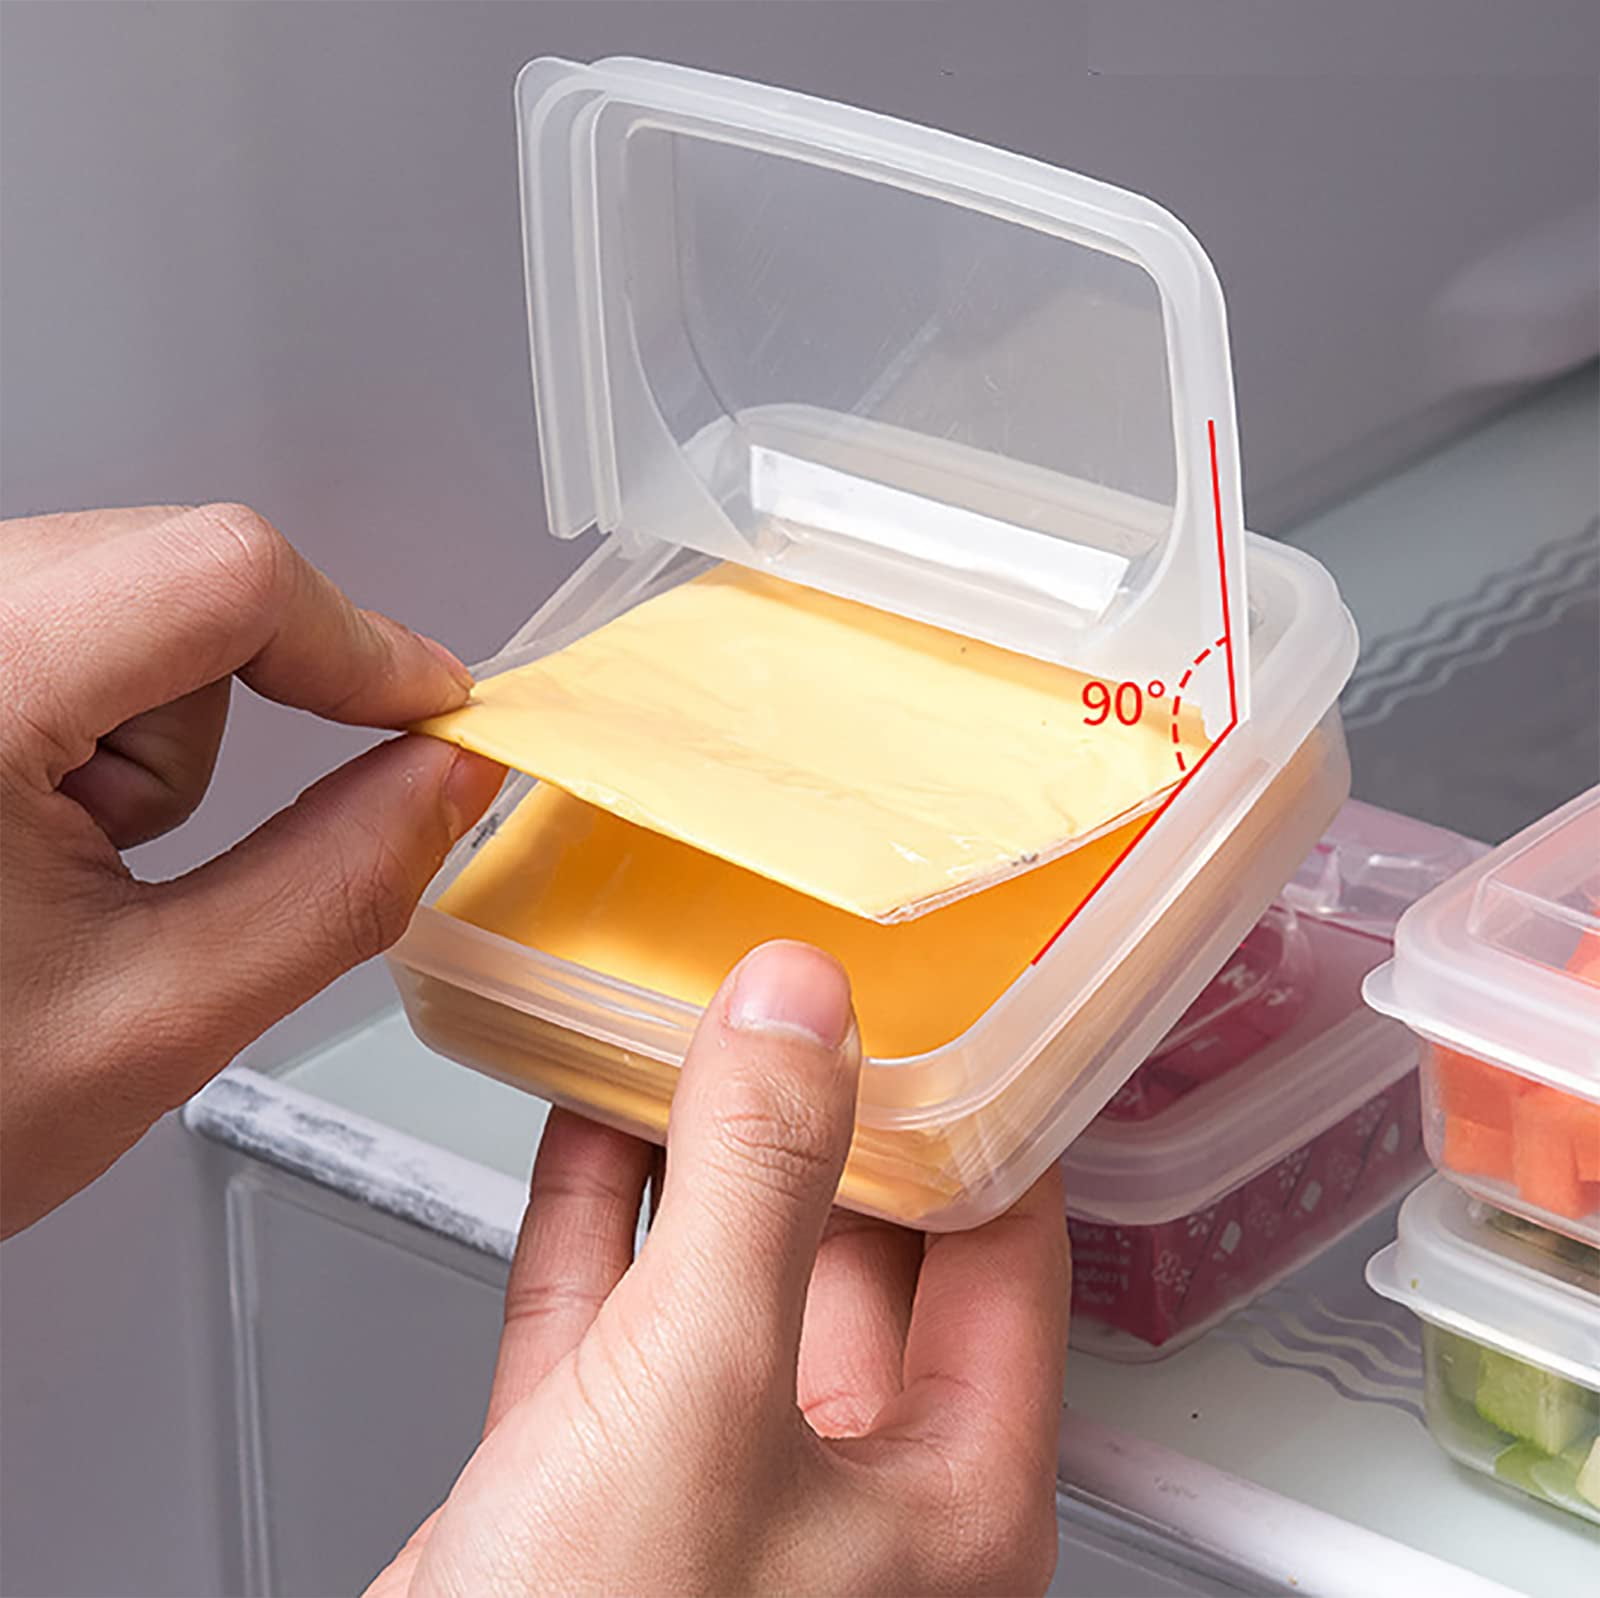  Mixcia 2 Pack Cheese Storage Container for Fridge